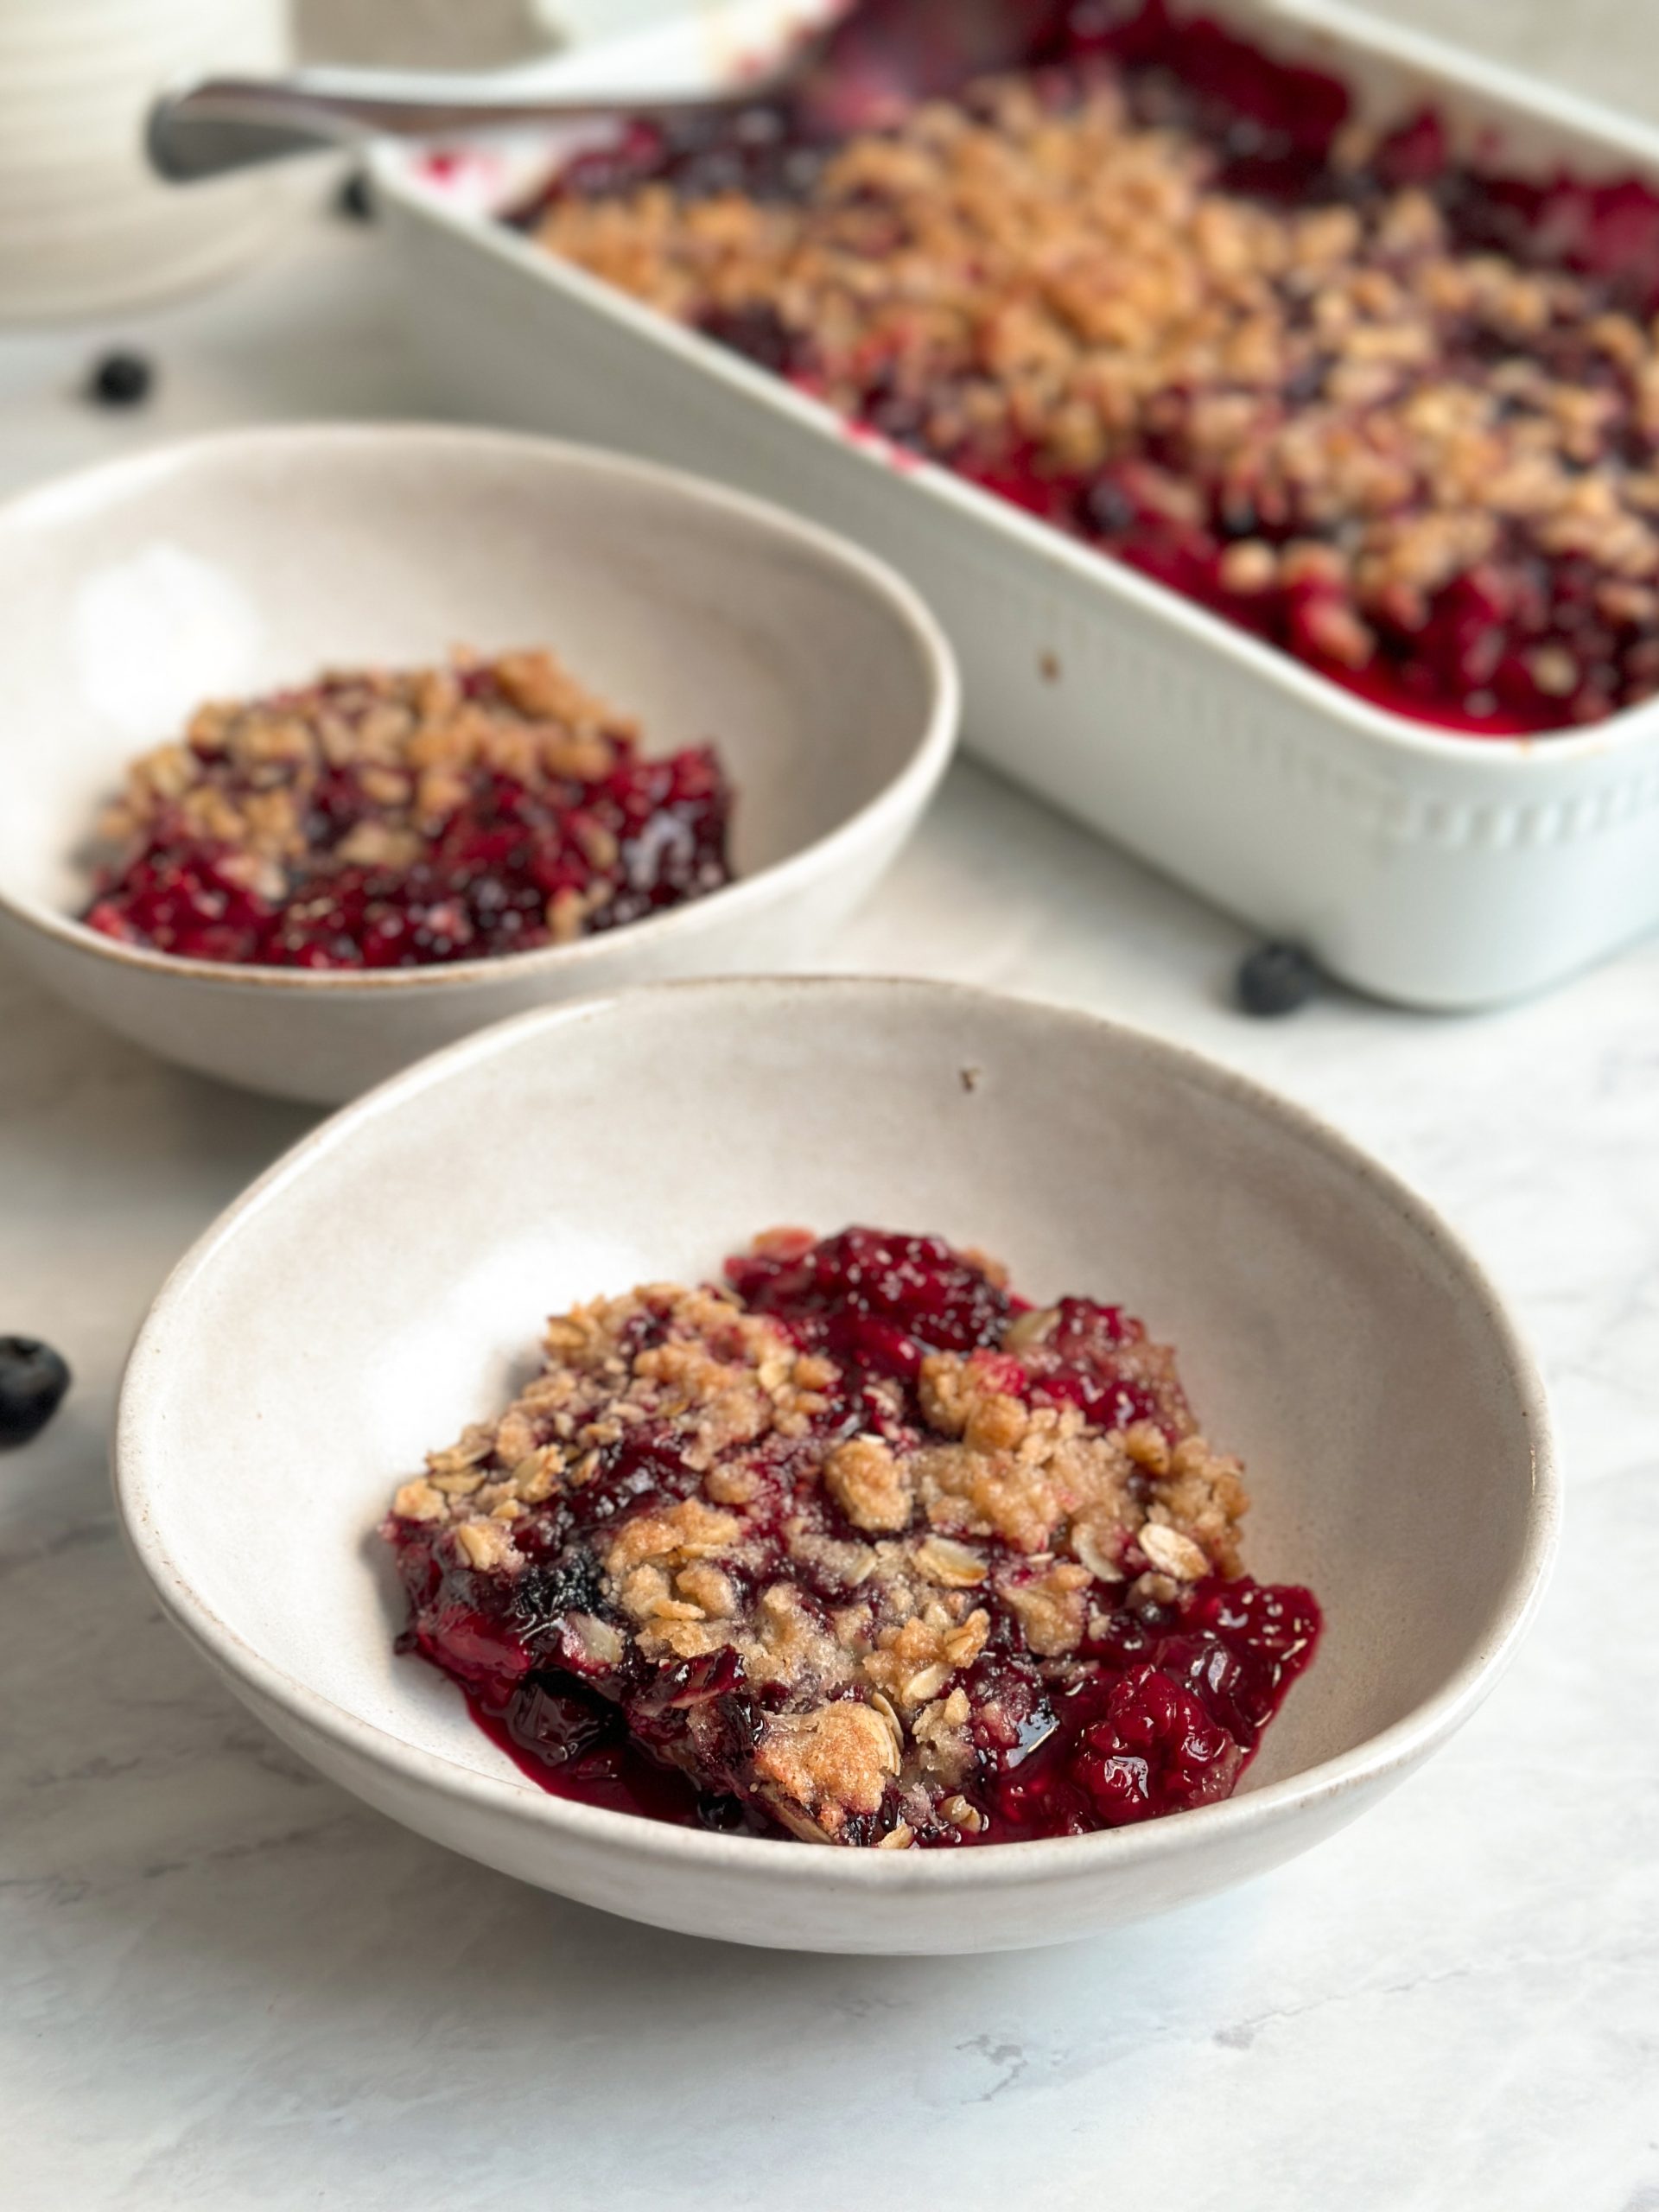 berry crumble in a bowl with a crispy oat crumble and bubbling berries underneath. Another bowl and dish seen in the background